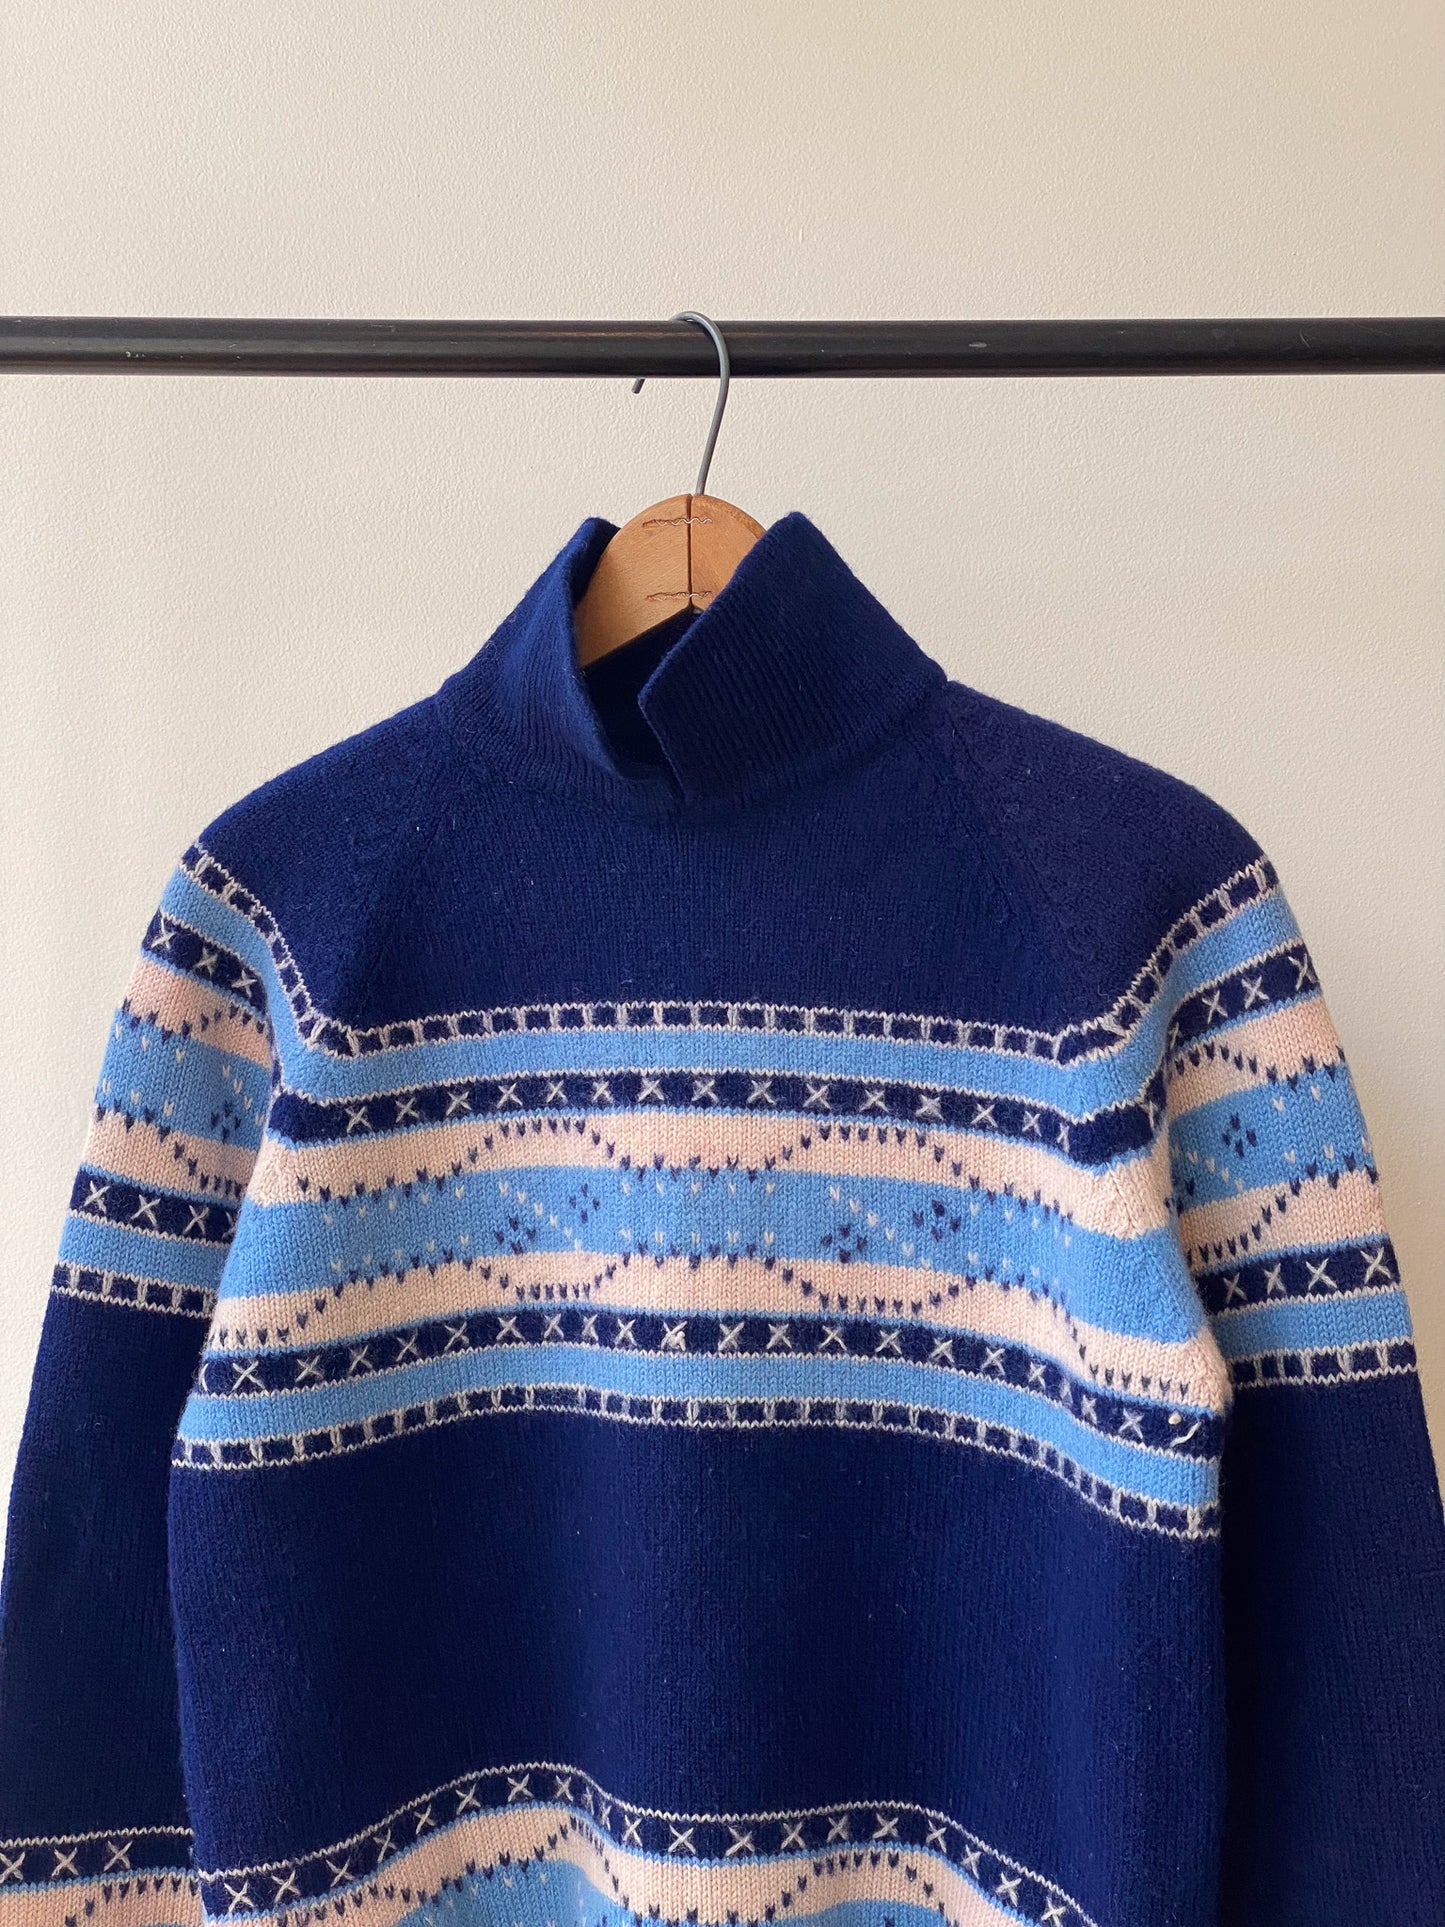 Blue Patterned Collared Wool Sweater—[S]